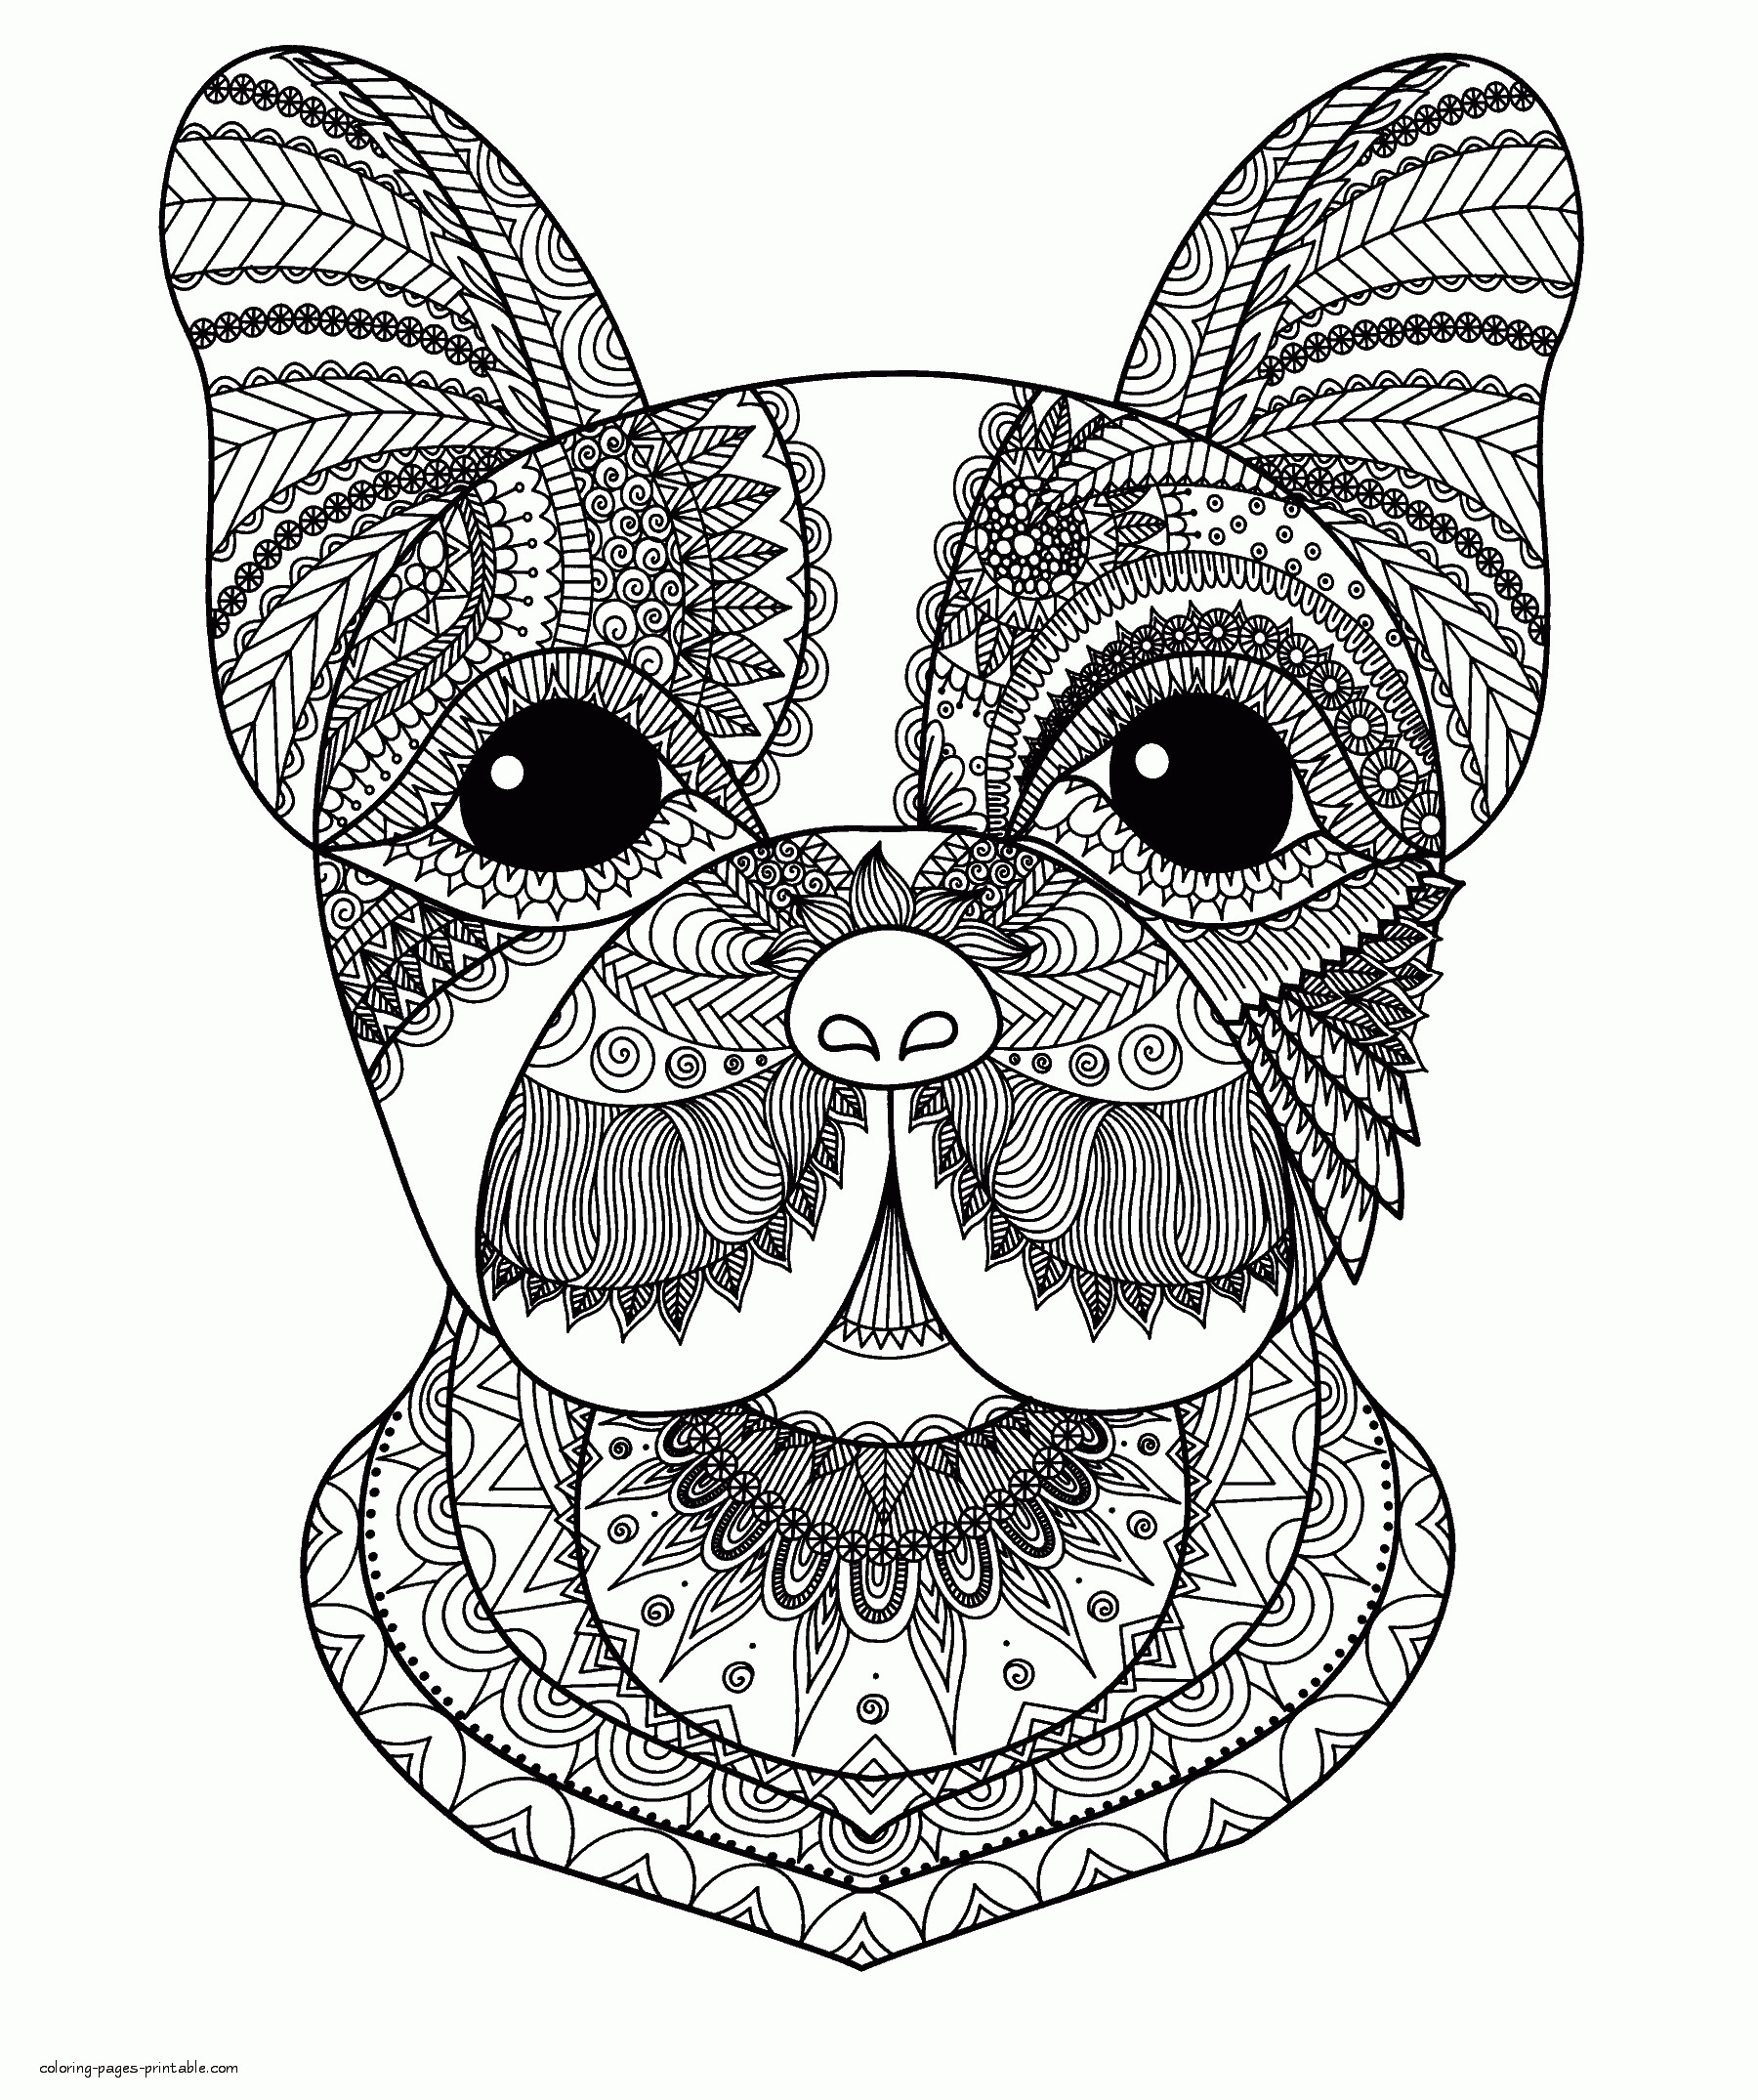 Intricate Coloring Pages For Kids
 Intricate Coloring Pages